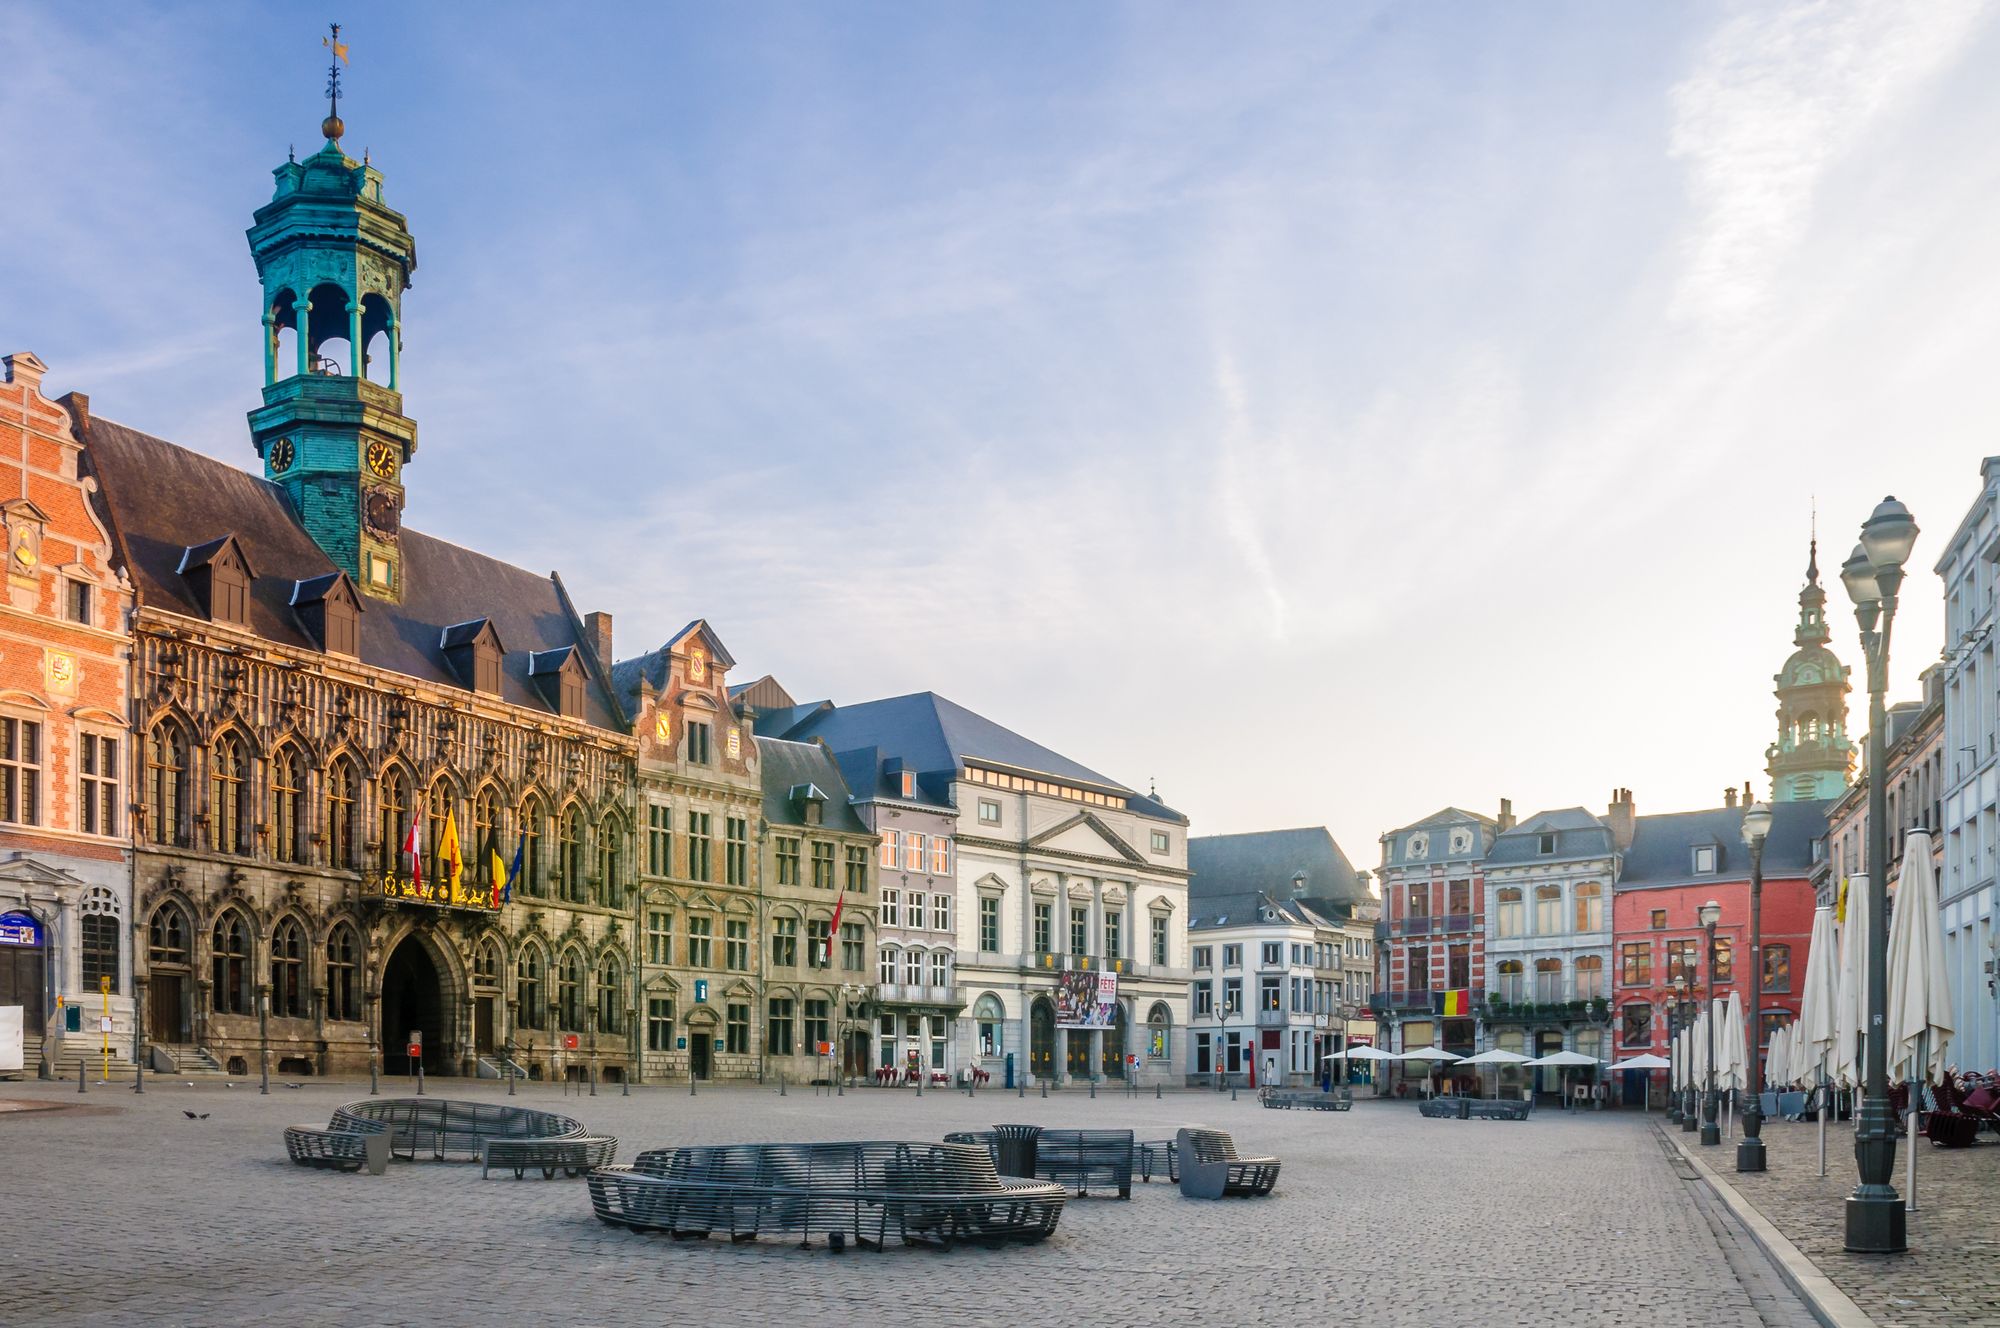 The must-sees in Mons